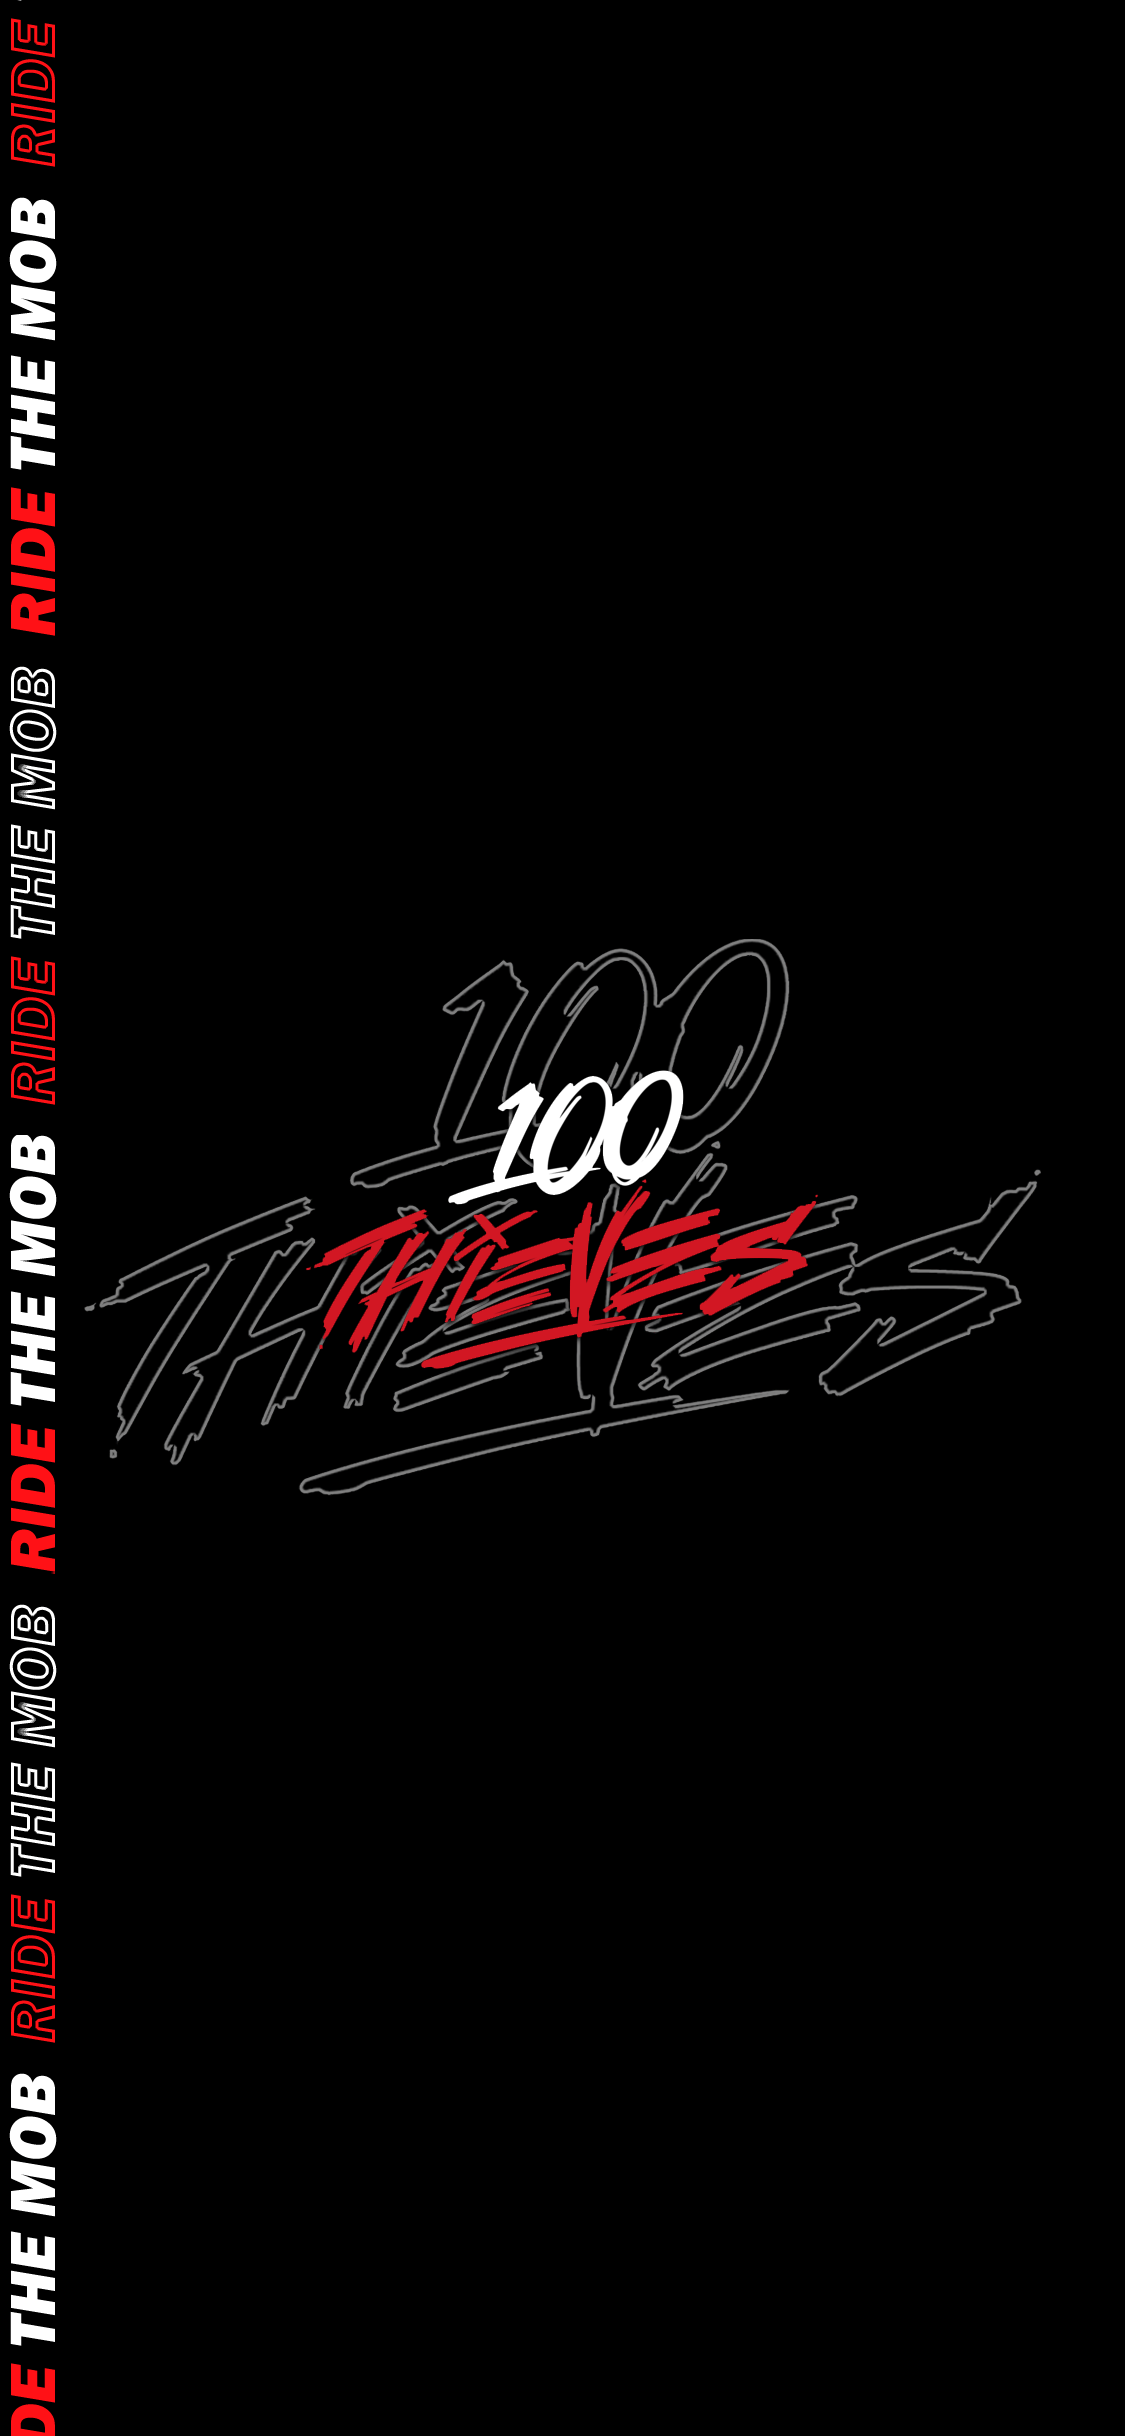 100 Thieves Wallpaper Set download link in the comments  r100thieves